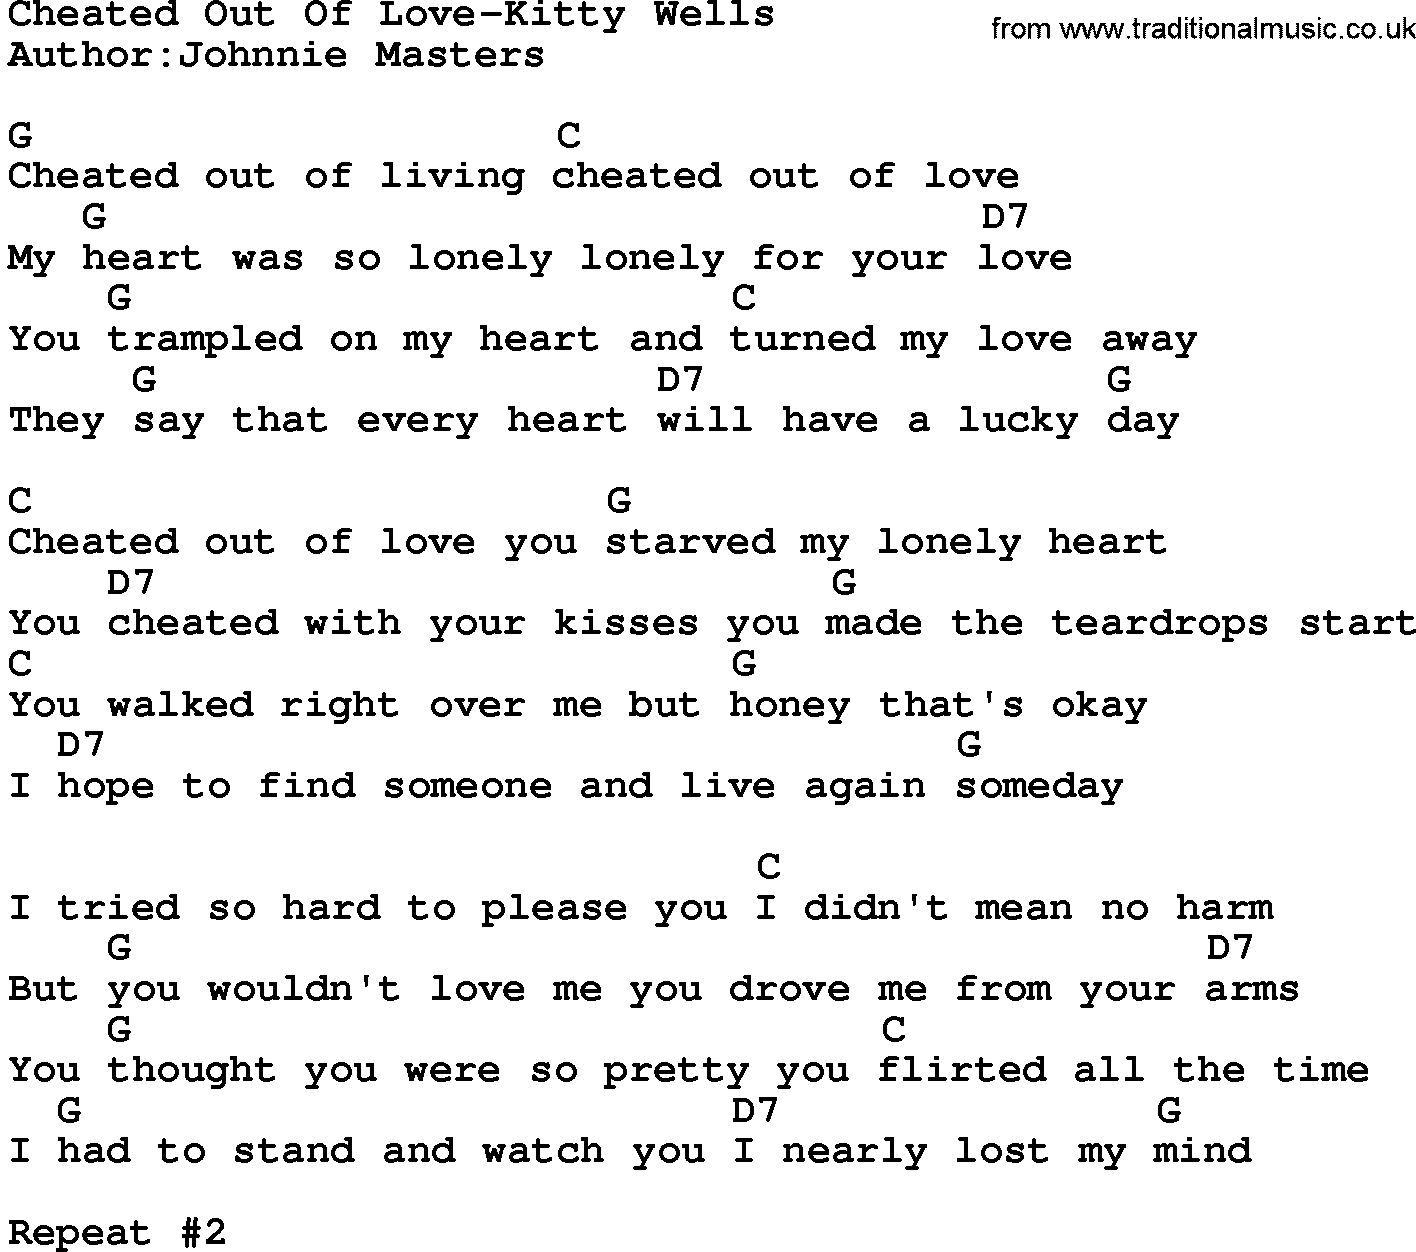 Country music song: Cheated Out Of Love-Kitty Wells lyrics and chords